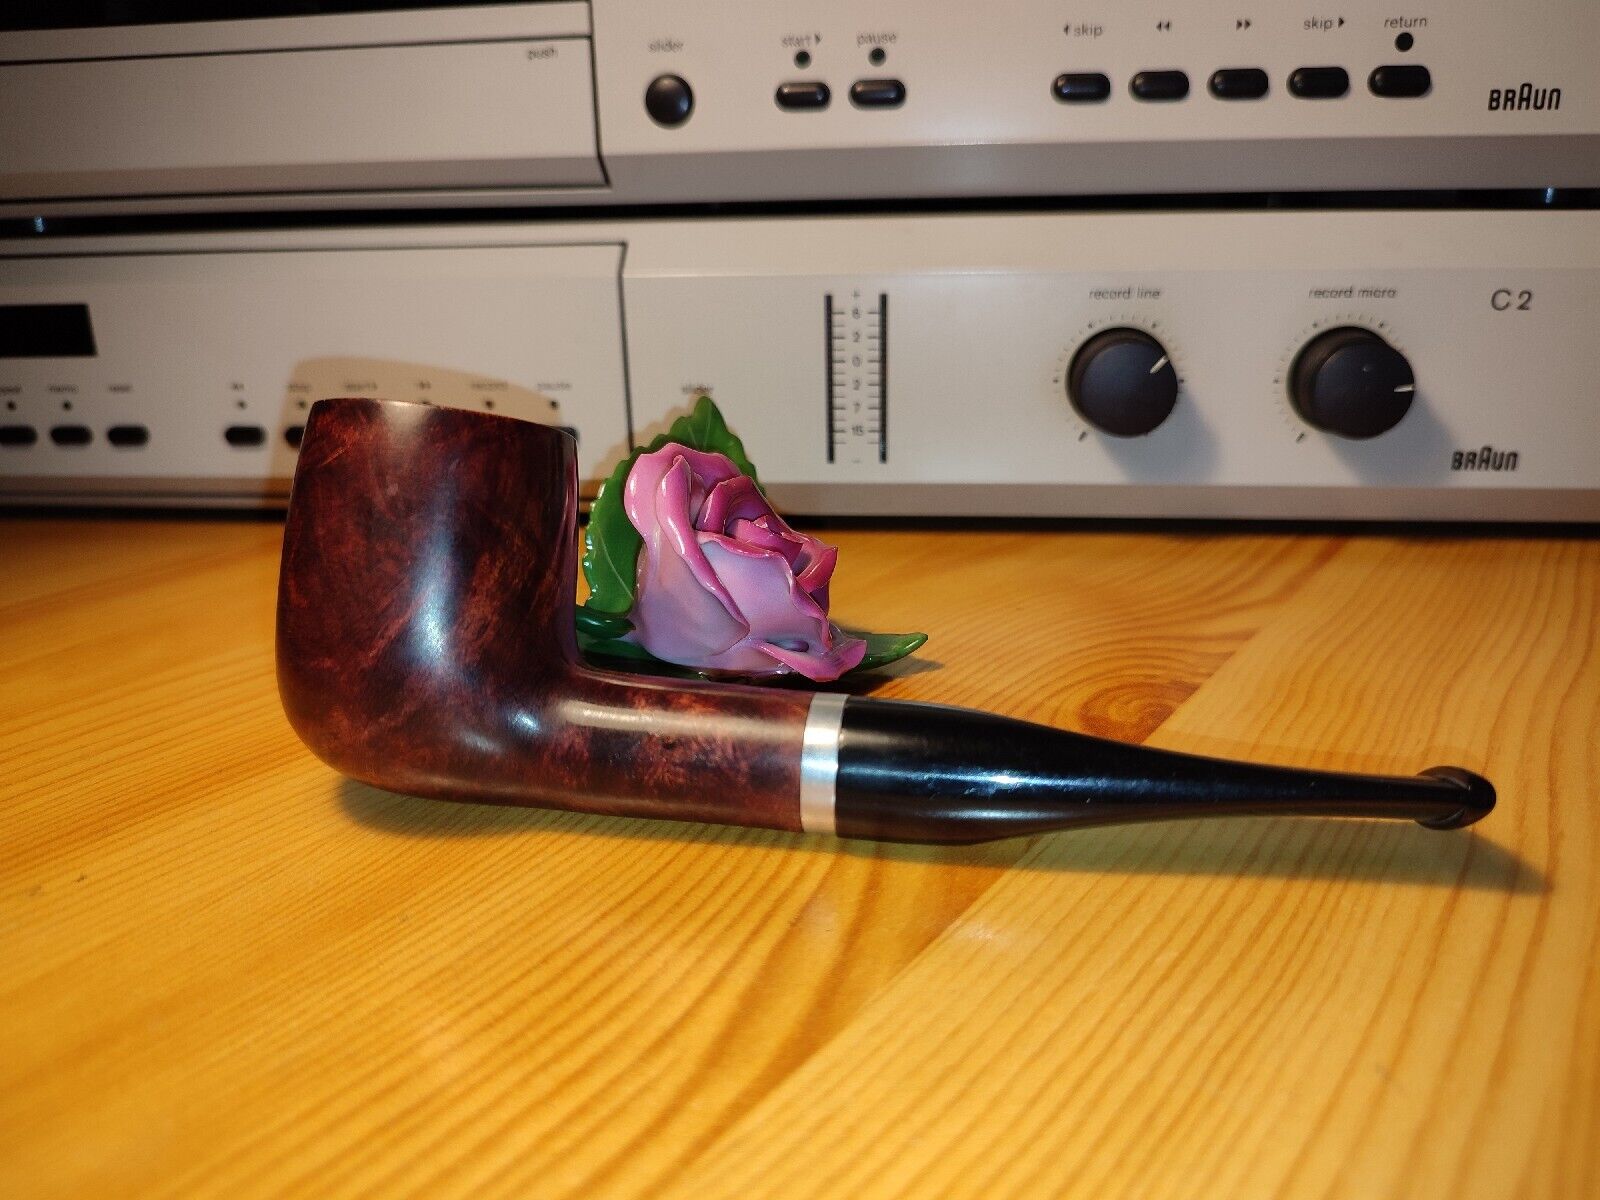 ONLY SMOKED ONCE MOLINA ITALY 9mm ESTATE PIPE pfeife